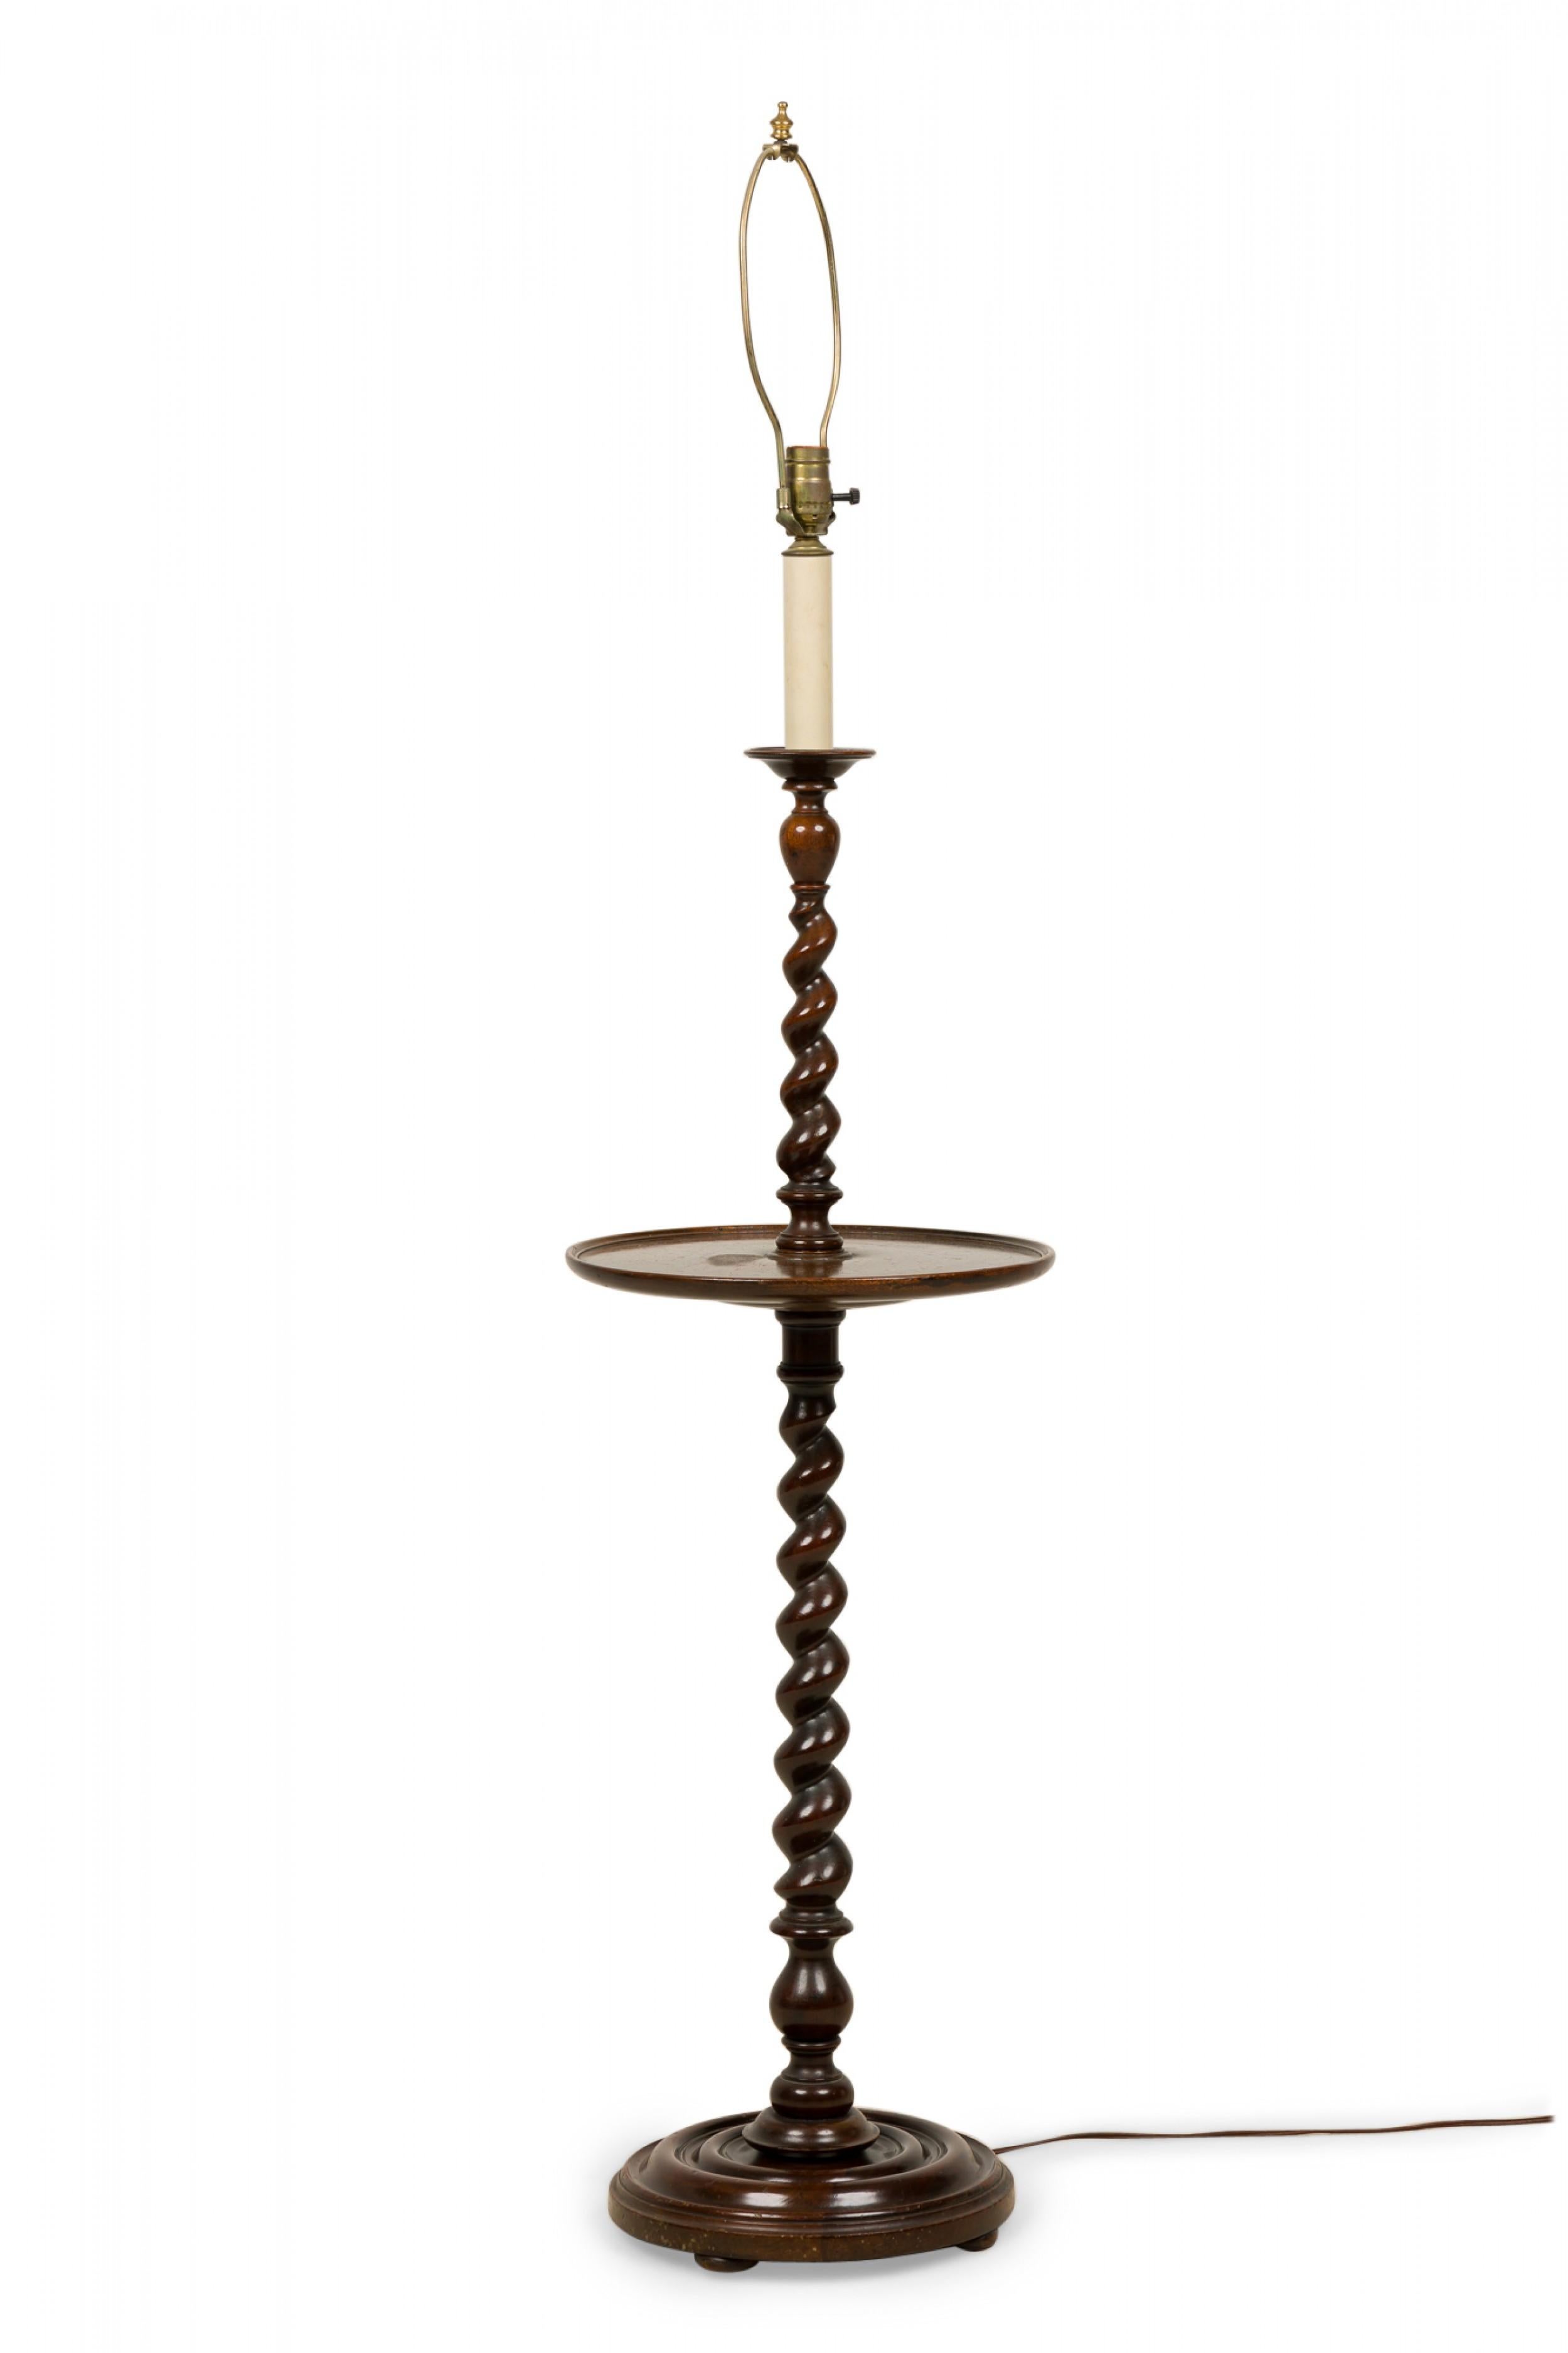 English Victorian-style floor lamp / table with a mahogany turned spindle post with circular table surface in the center of the post, resting on a circular stepped turned wooden base and mounted with brass hardware, topped with a bright green and